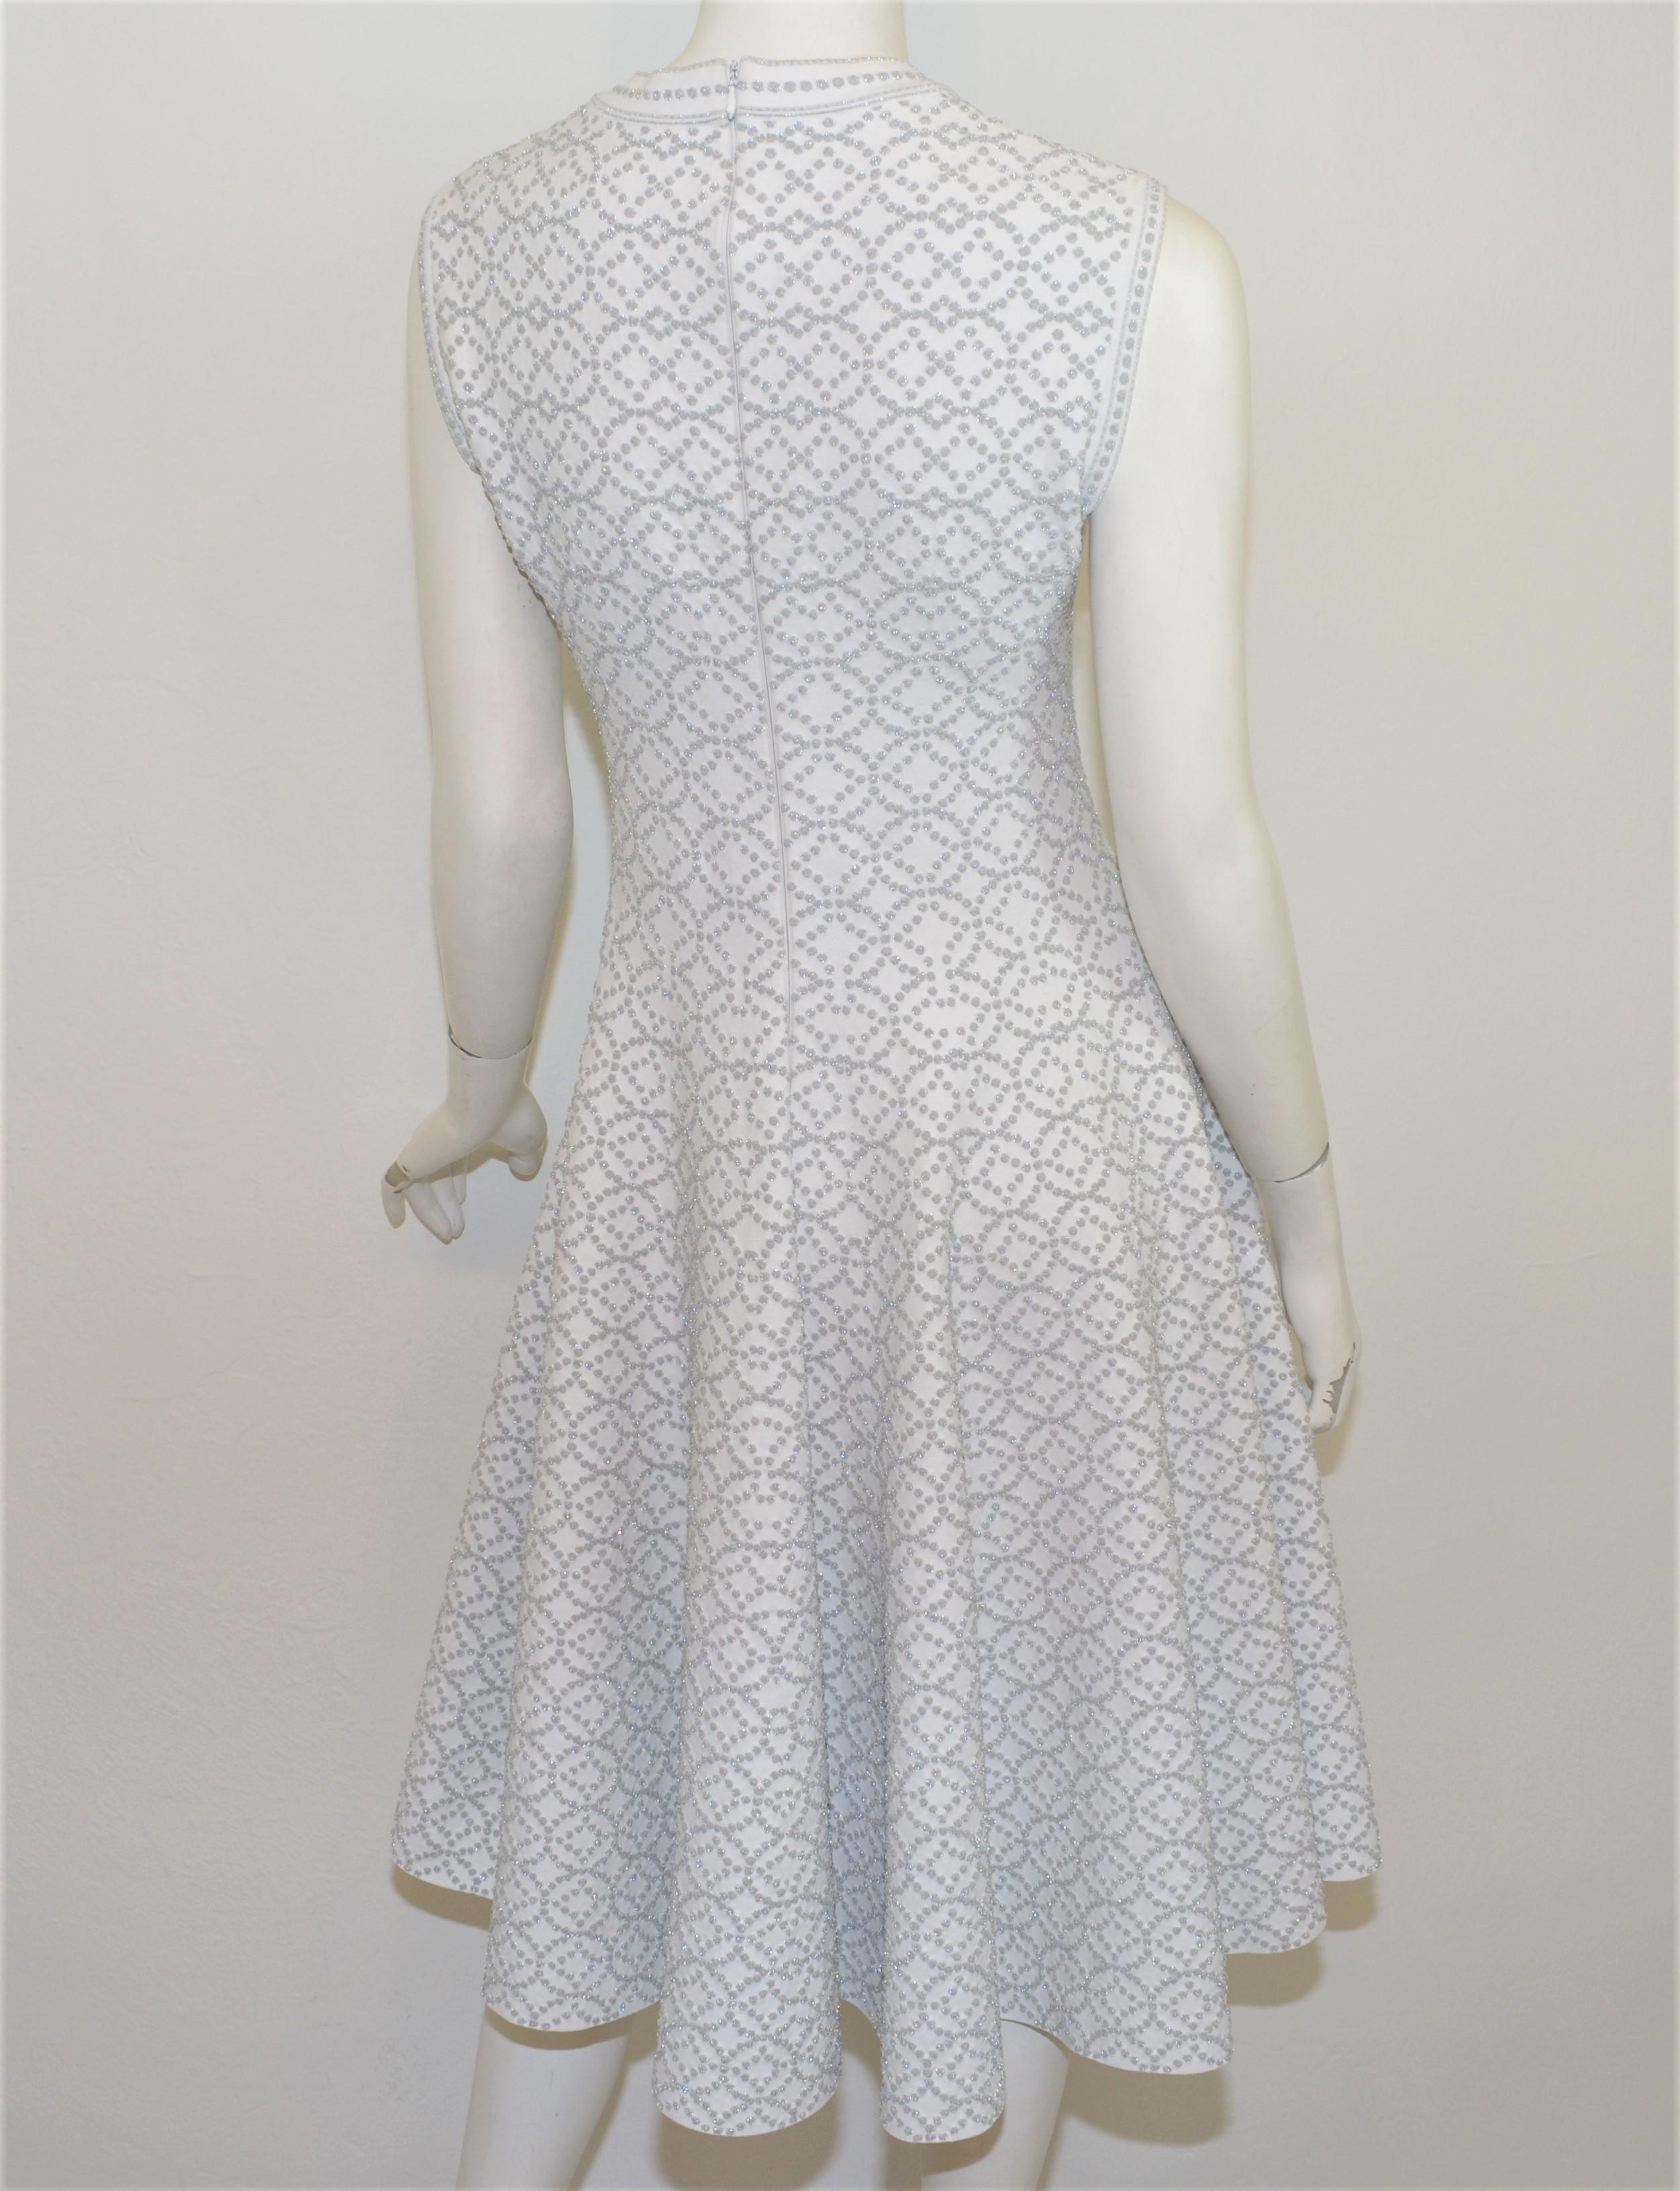 Alaia fit and flare dress featured in white with metallic silver threading throughout with a fit and flare design. Dress has a back zipper closure and is labeled size 42. Made in Italy.

Measurements:
Bust 32”
Waist 28”
Hips 40”
Length 41.5”